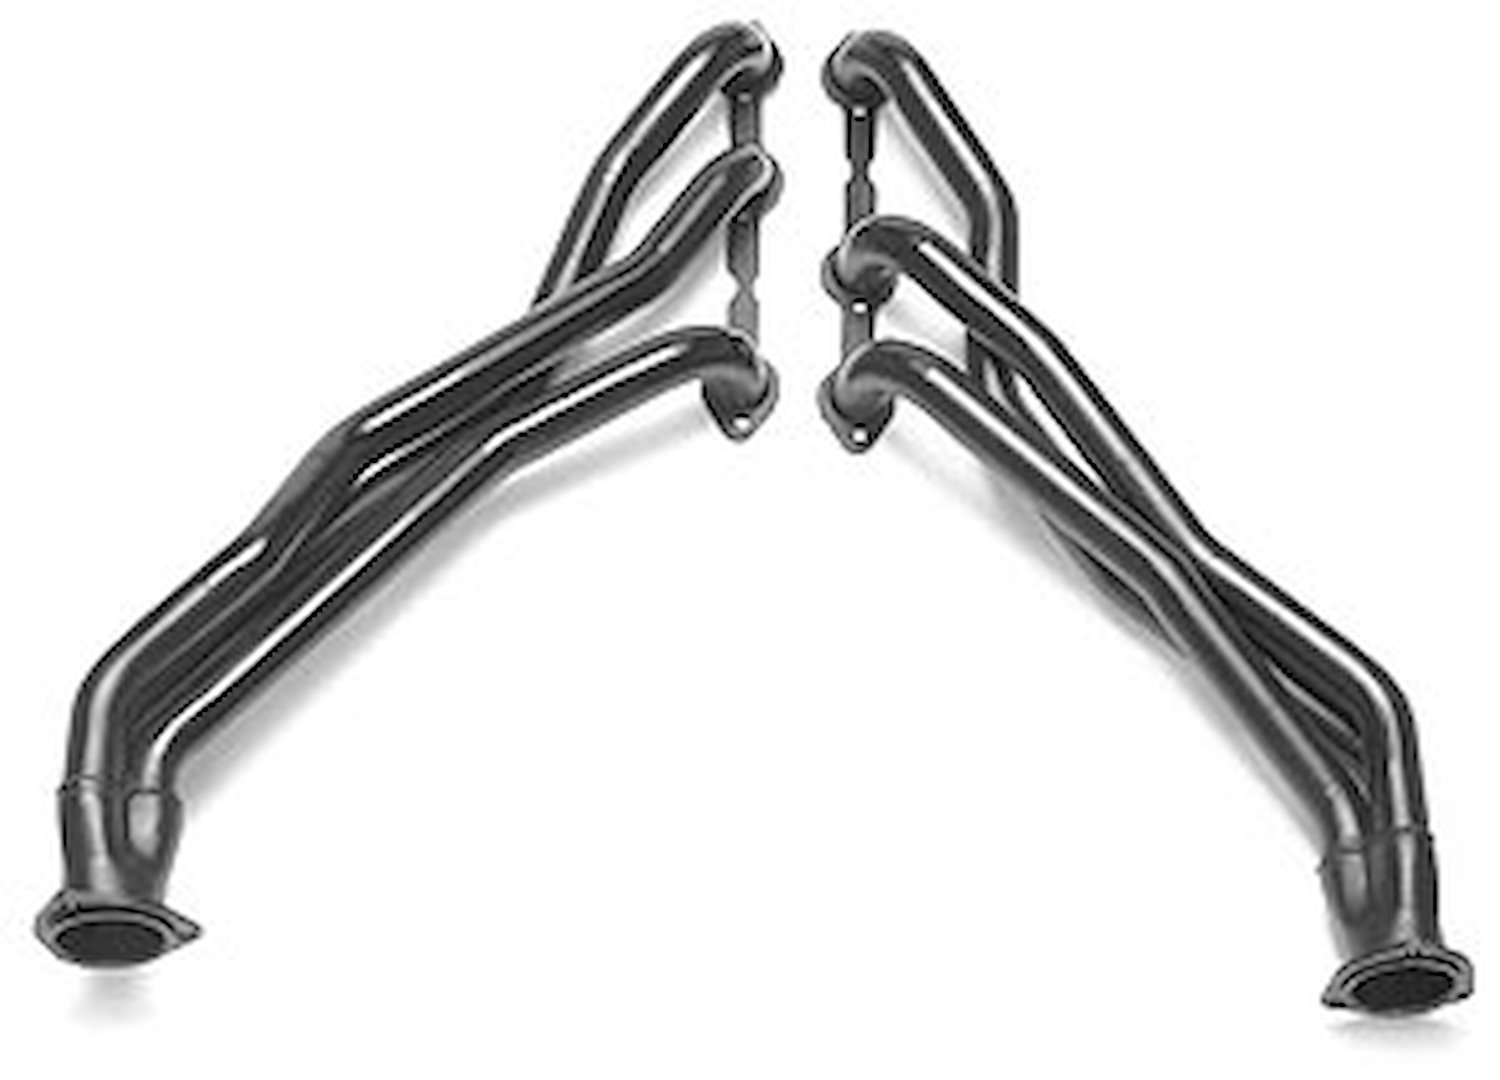 Standard Duty Uncoated Full Length Headers for 1988-93 S10 BLAZER, S10 PICKUP, S15 JIMMY, S15 PICKUP, SONOMA 4.3L 4WD